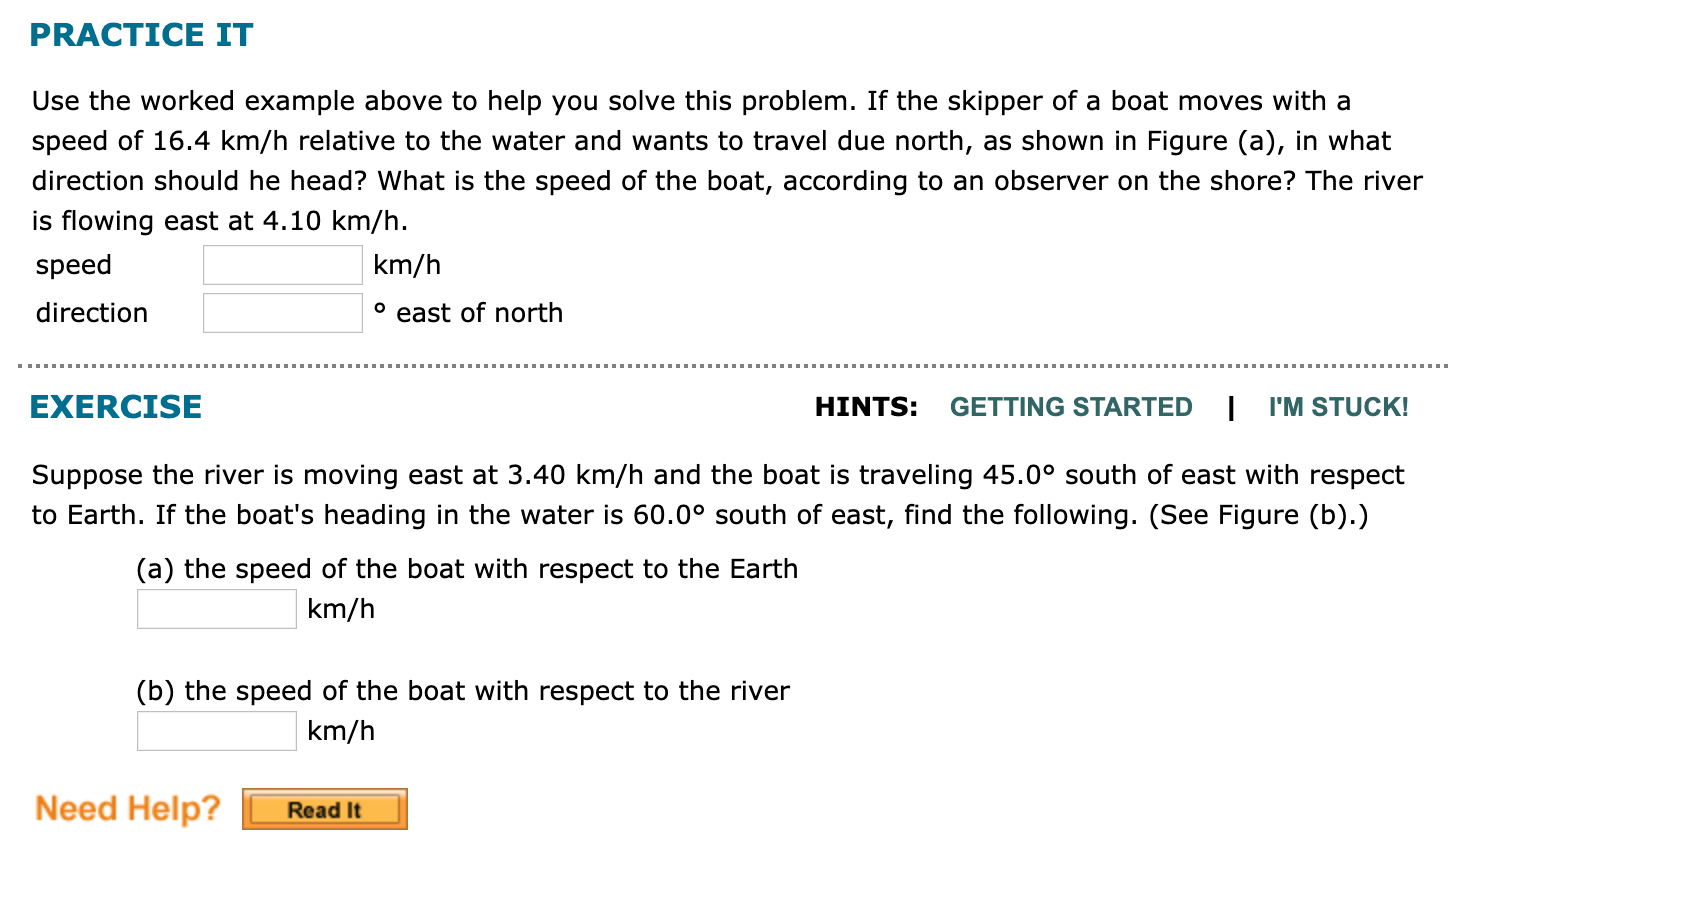 PRACTICE IT
Use the worked example above to help you solve this problem. If the skipper of a boat moves with a
speed of 16.4 km/h relative to the water and wants to travel due north, as shown in Figure (a), in what
direction should he head? What is the speed of the boat, according to an observer on the shore? The river
is flowing east at 4.10 km/h.
speed
km/h
° east of north
direction
EXERCISE
HINTS:
GETTING STARTED
I'M STUCK!
Suppose the river is moving east at 3.40 km/h and the boat is traveling 45.0° south of east with respect
to Earth. If the boat's heading in the water is 60.0° south of east, find the following. (See Figure (b).)
(a) the speed of the boat with respect to the Earth
km/h
(b) the speed of the boat with respect to the river
km/h
Need Help?
Read It
